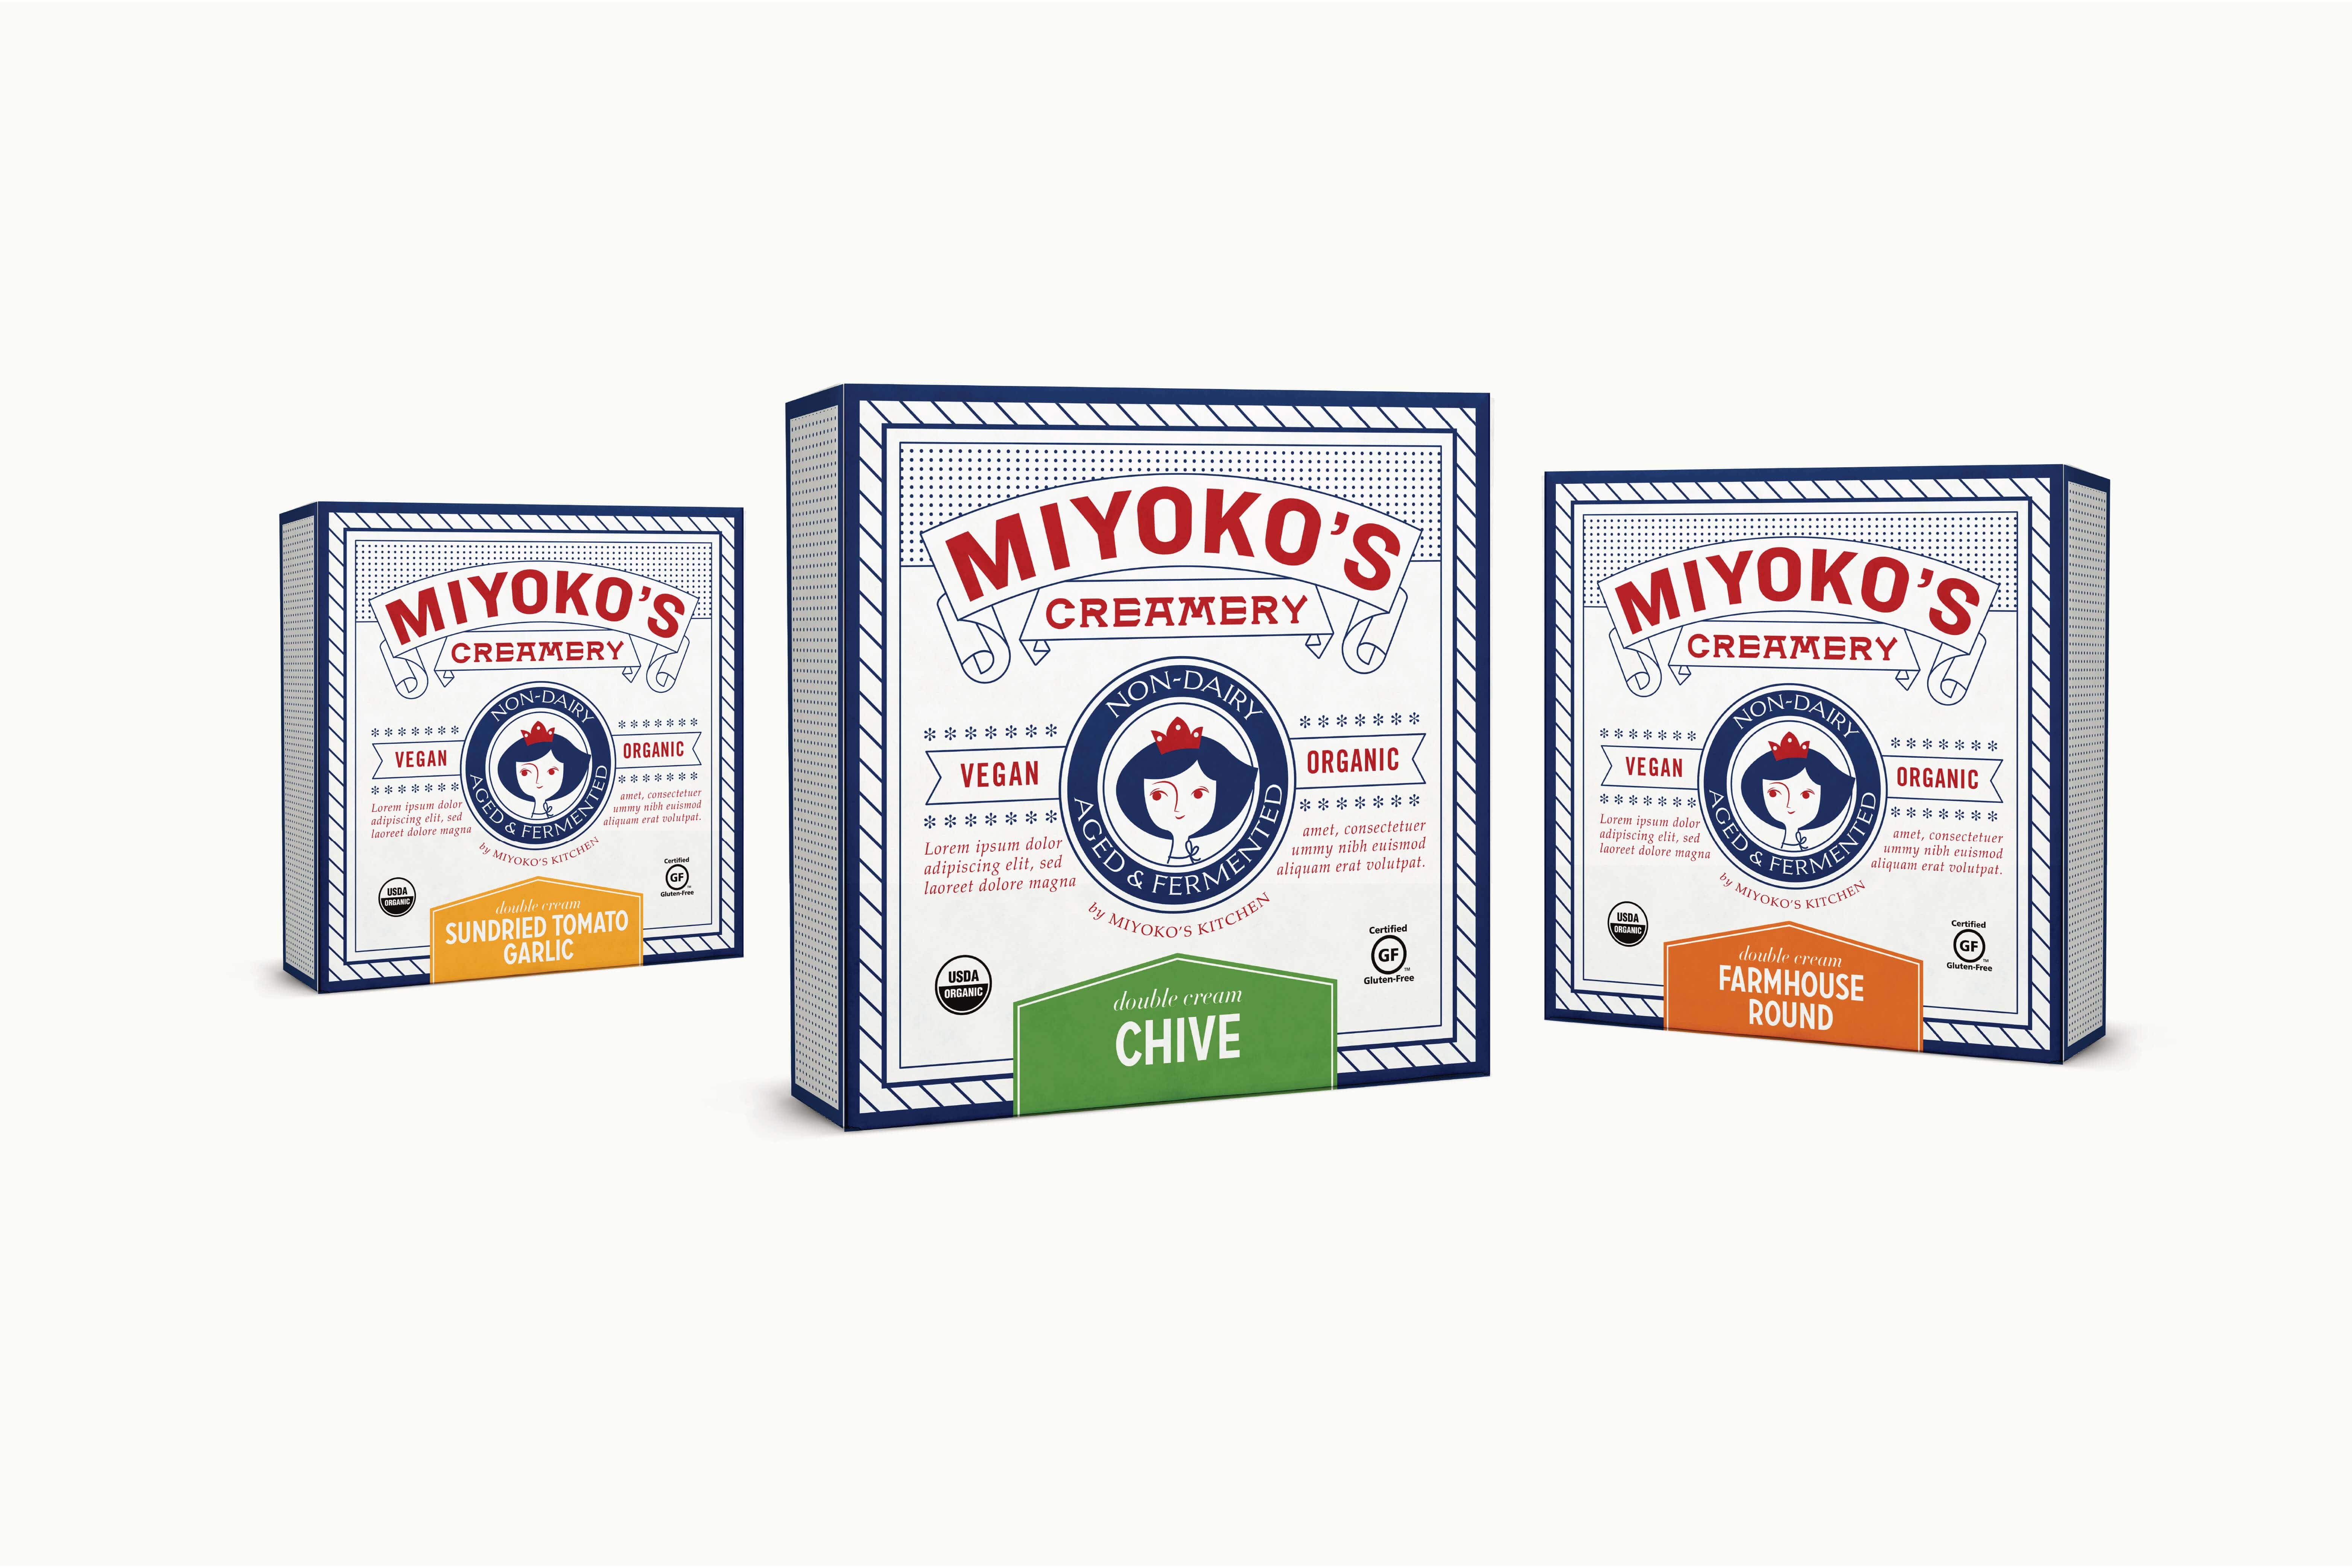 Runner up Miyoko's Creamery packaging design concept featuring a caricature of the founder, Miyoko. 